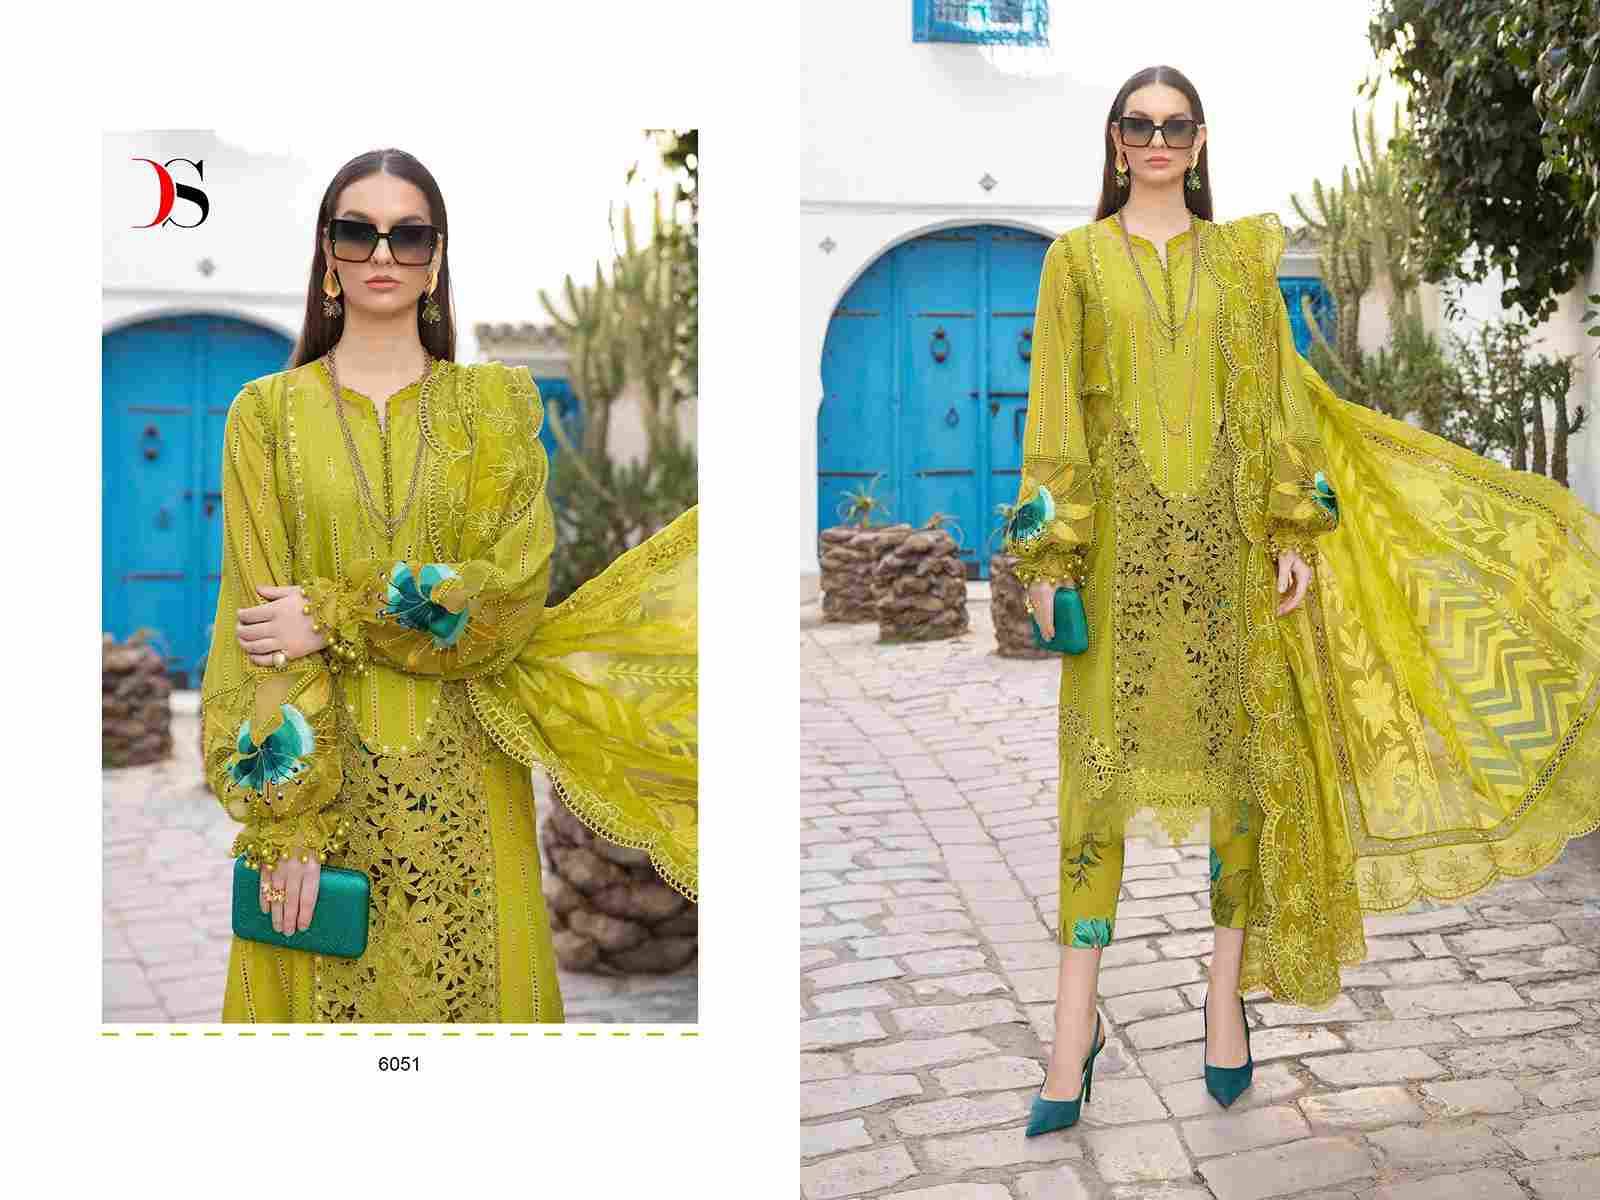 Maria.B. Voyage Lawn-24 By Deepsy Suits 6051 To 6056 Series Designer Pakistani Suits Beautiful Fancy Stylish Colorful Party Wear & Occasional Wear Pure Cotton With Embroidery Dresses At Wholesale Price